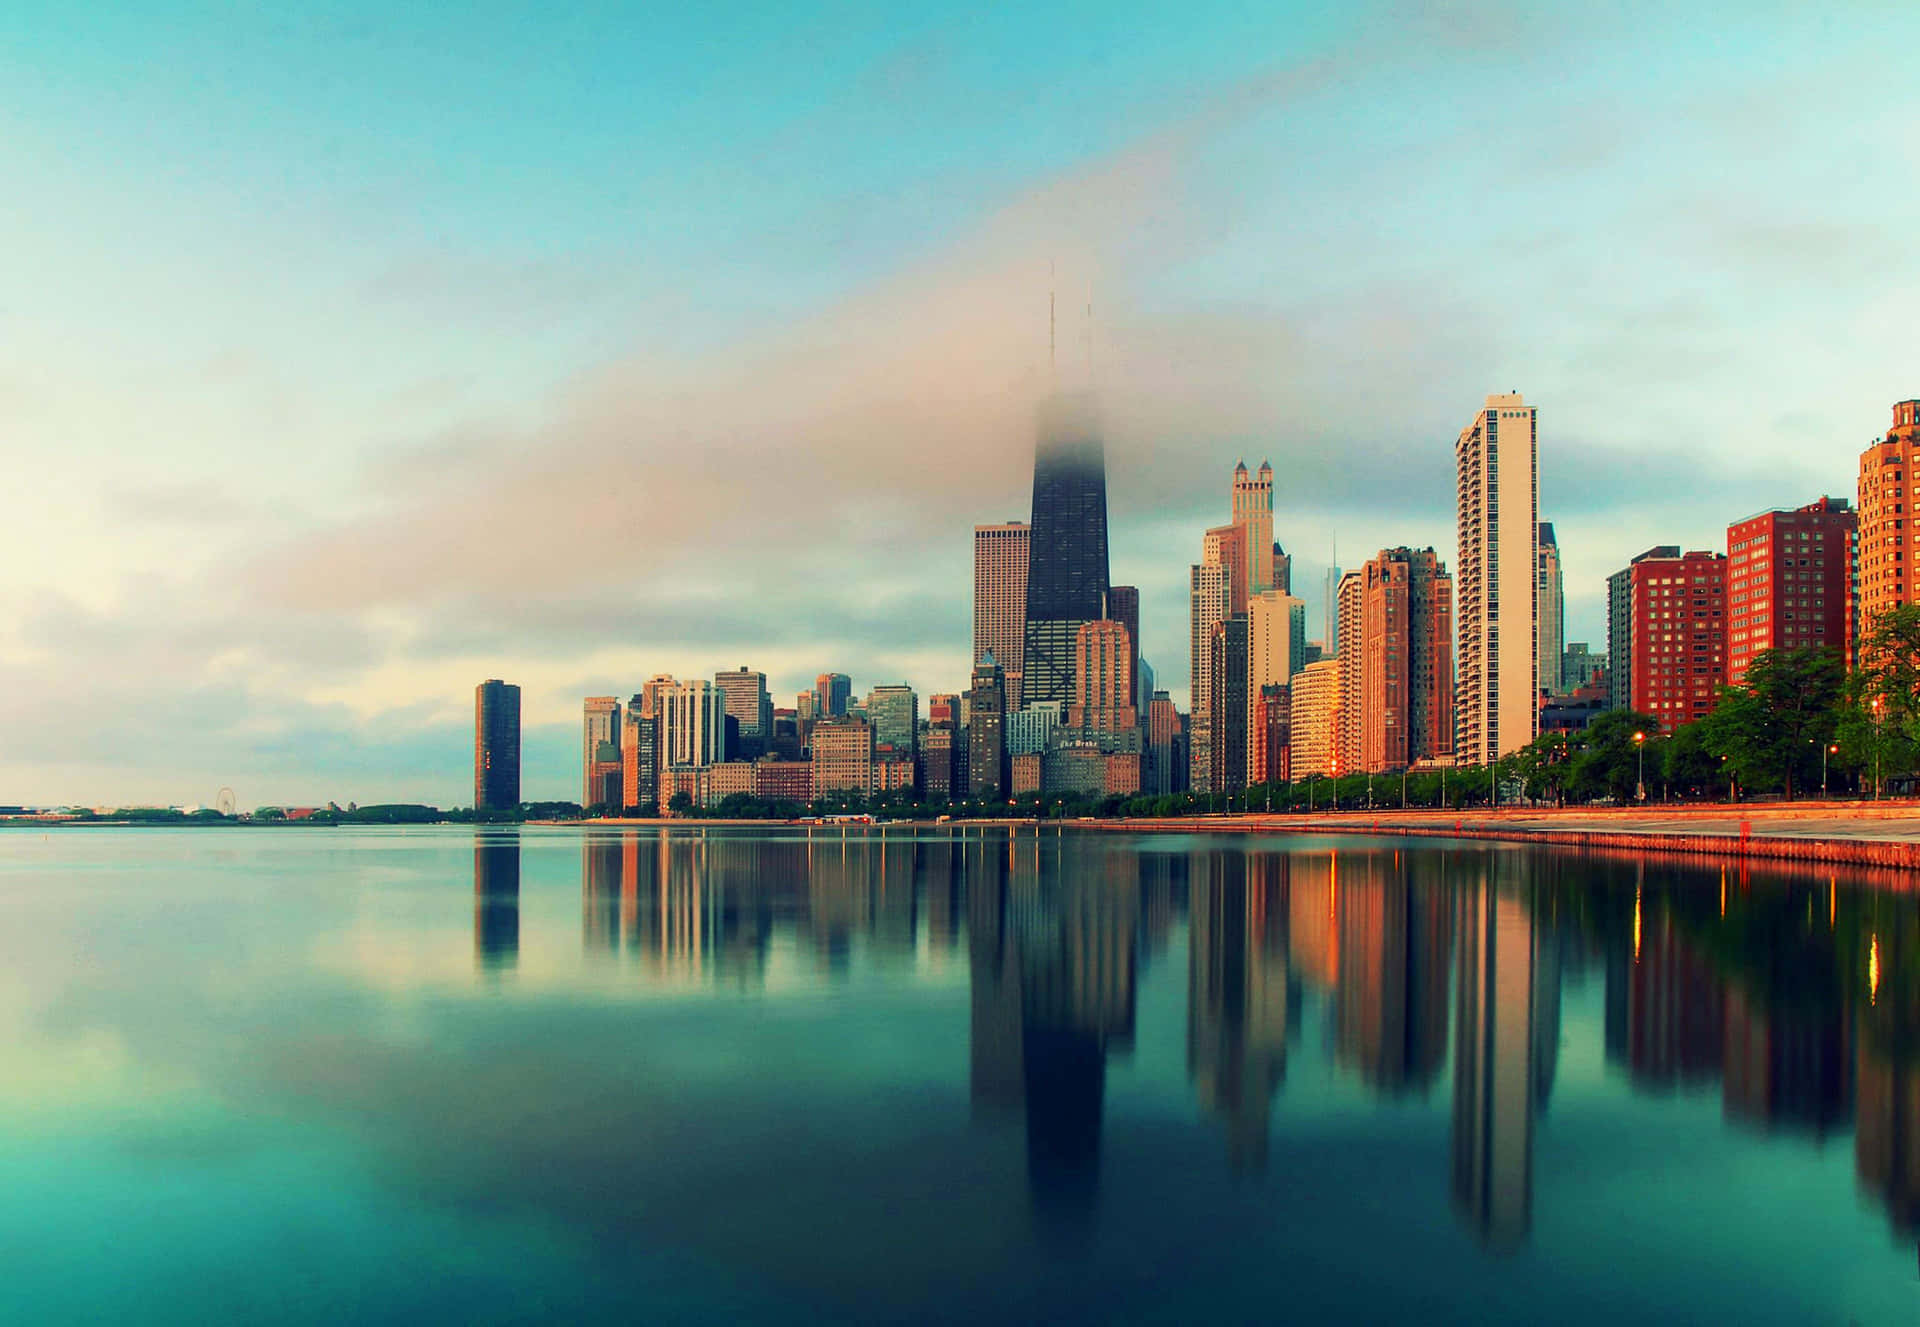 Chicago, IL - An Iconic City with an Everlasting Popularity